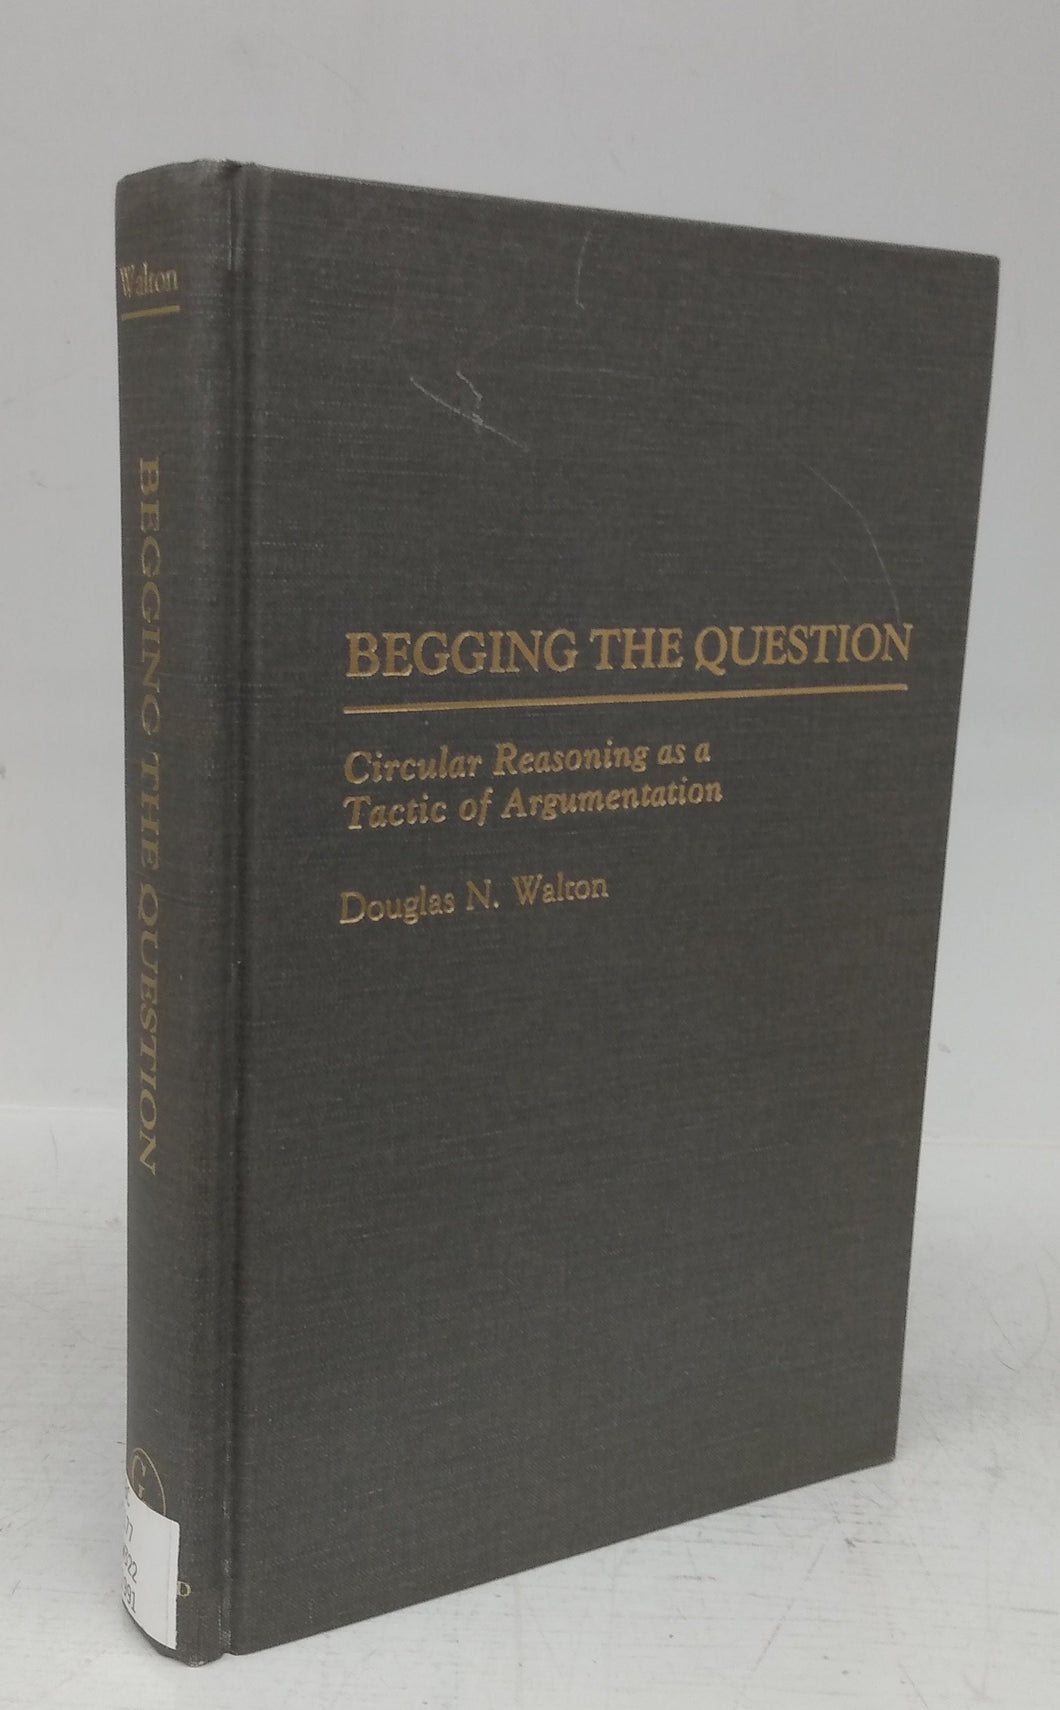 Begging The Question: Circular Reasoning as a Tactic of Argumentation